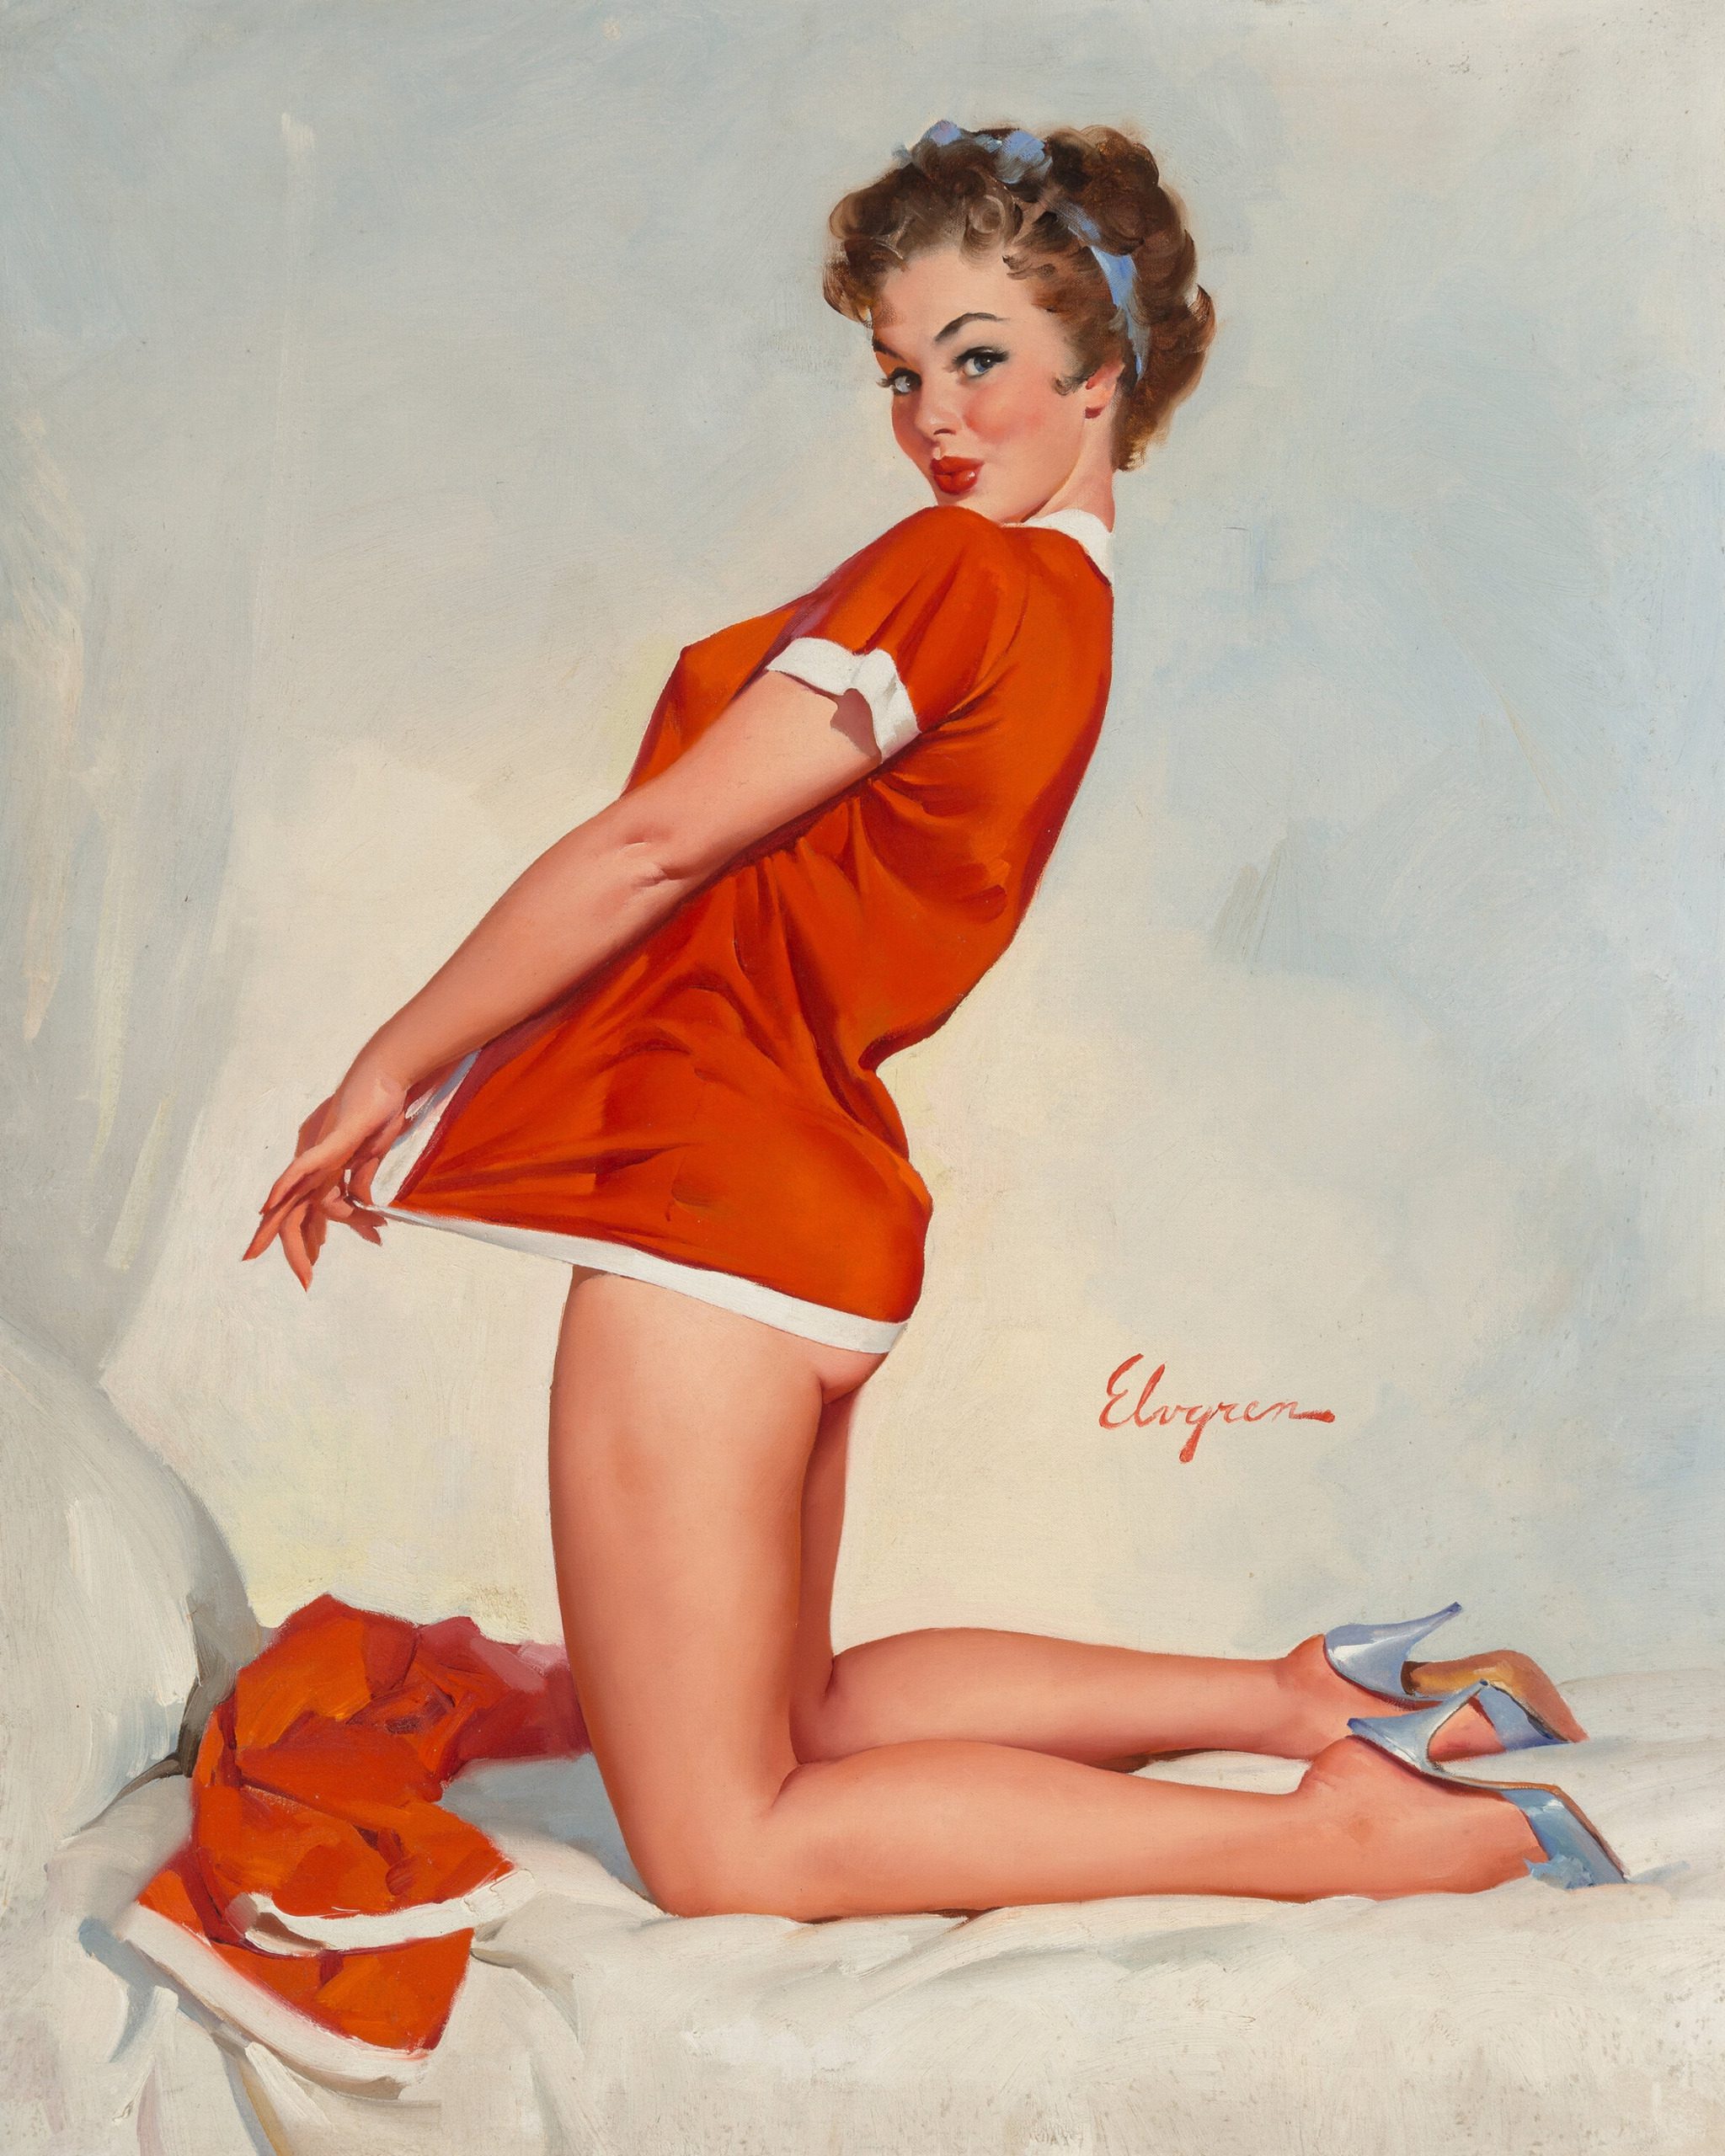 Pinup Art Archives Page Of Remembering Pinups Of Last Century